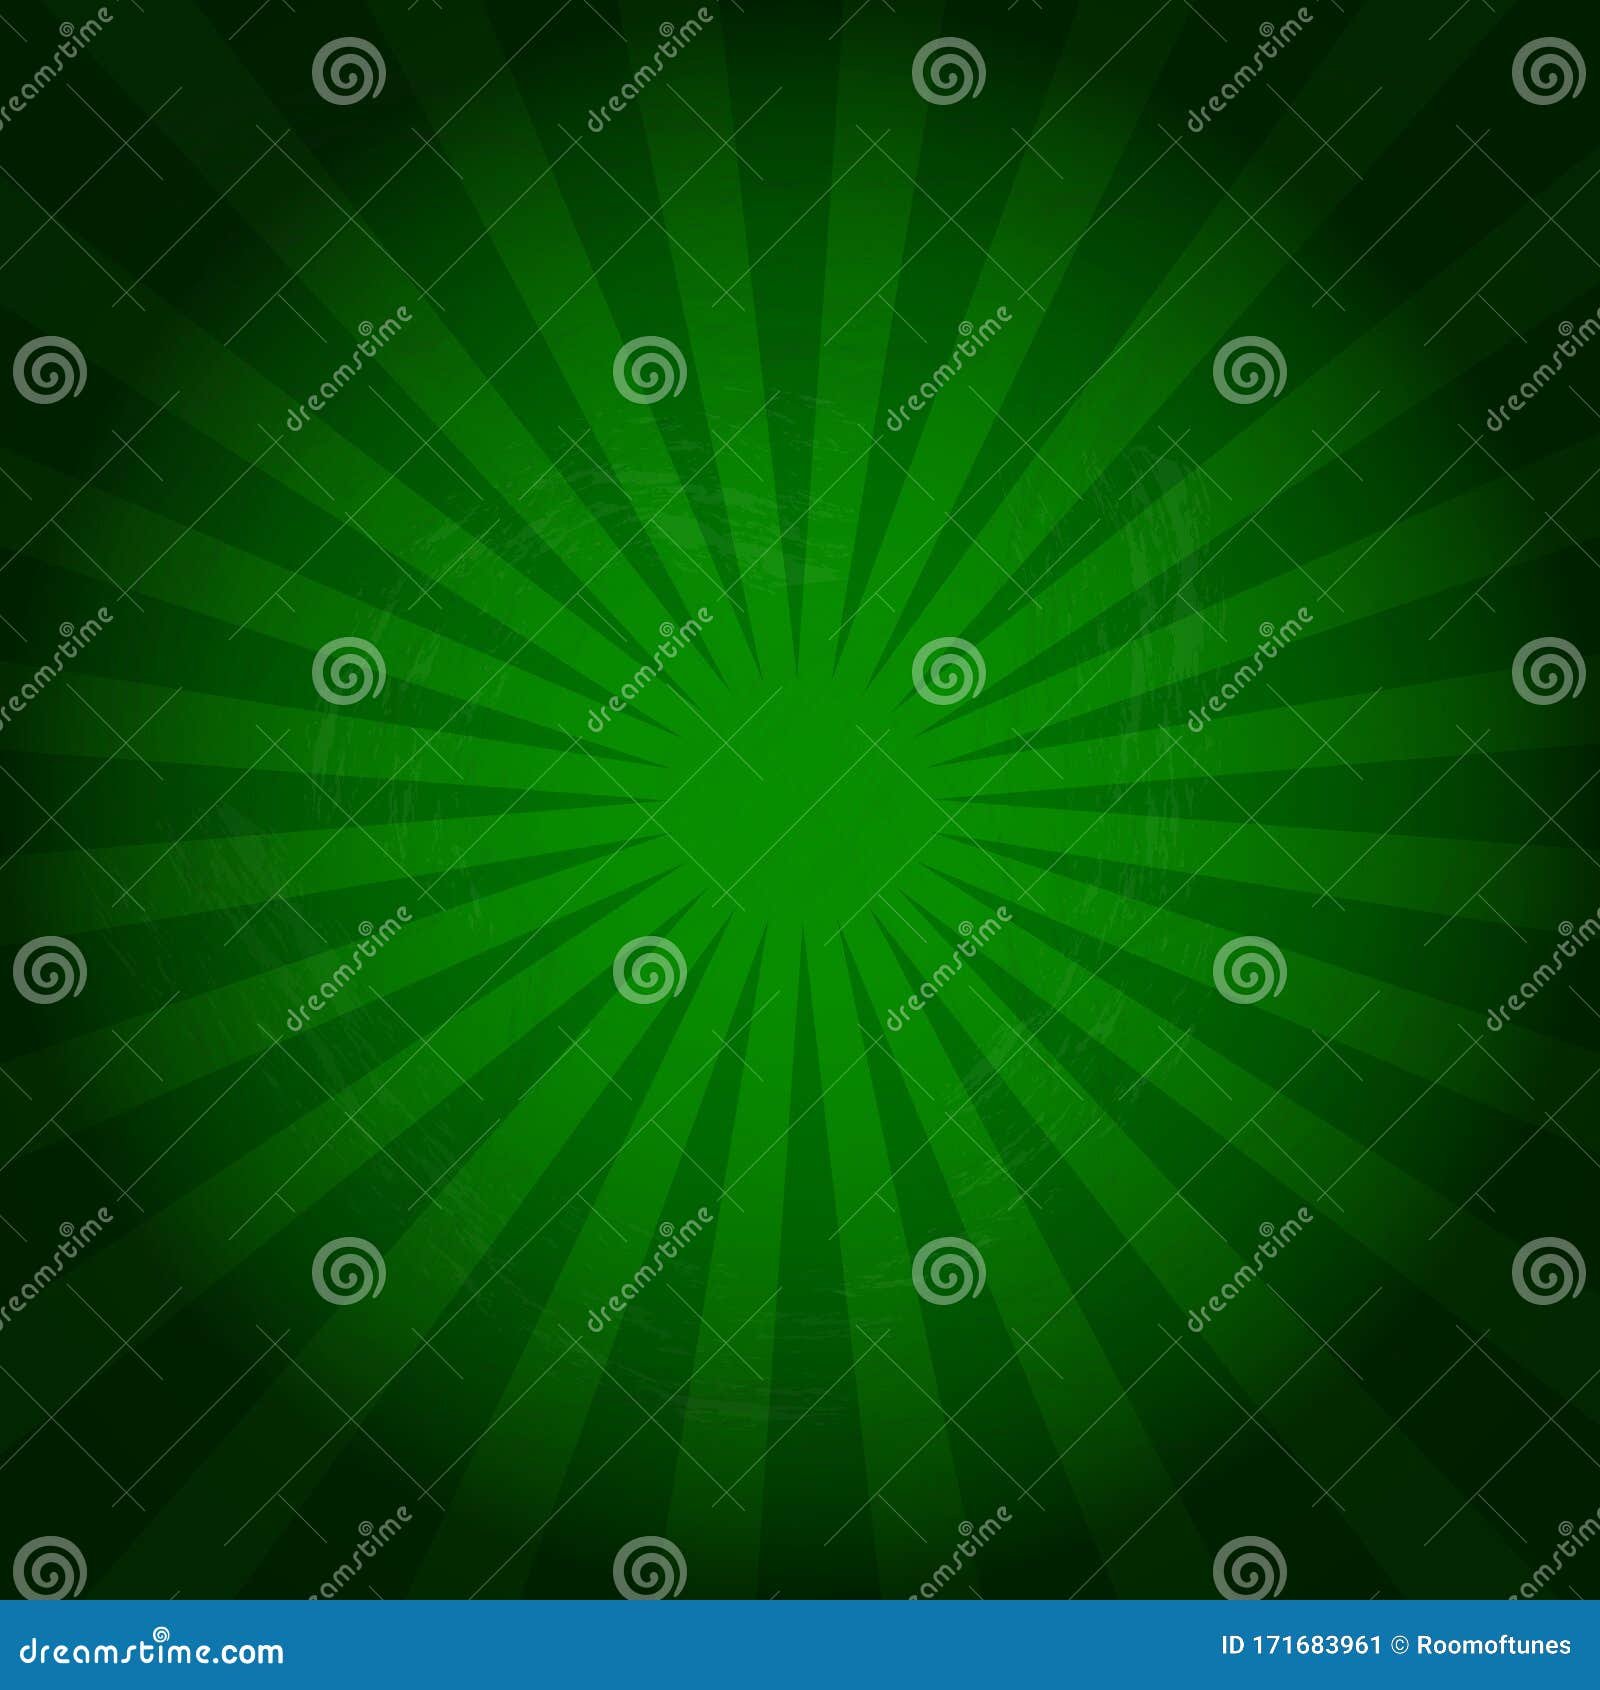 Vector Illustration of Green Patrick Background in Retro Style Stock ...